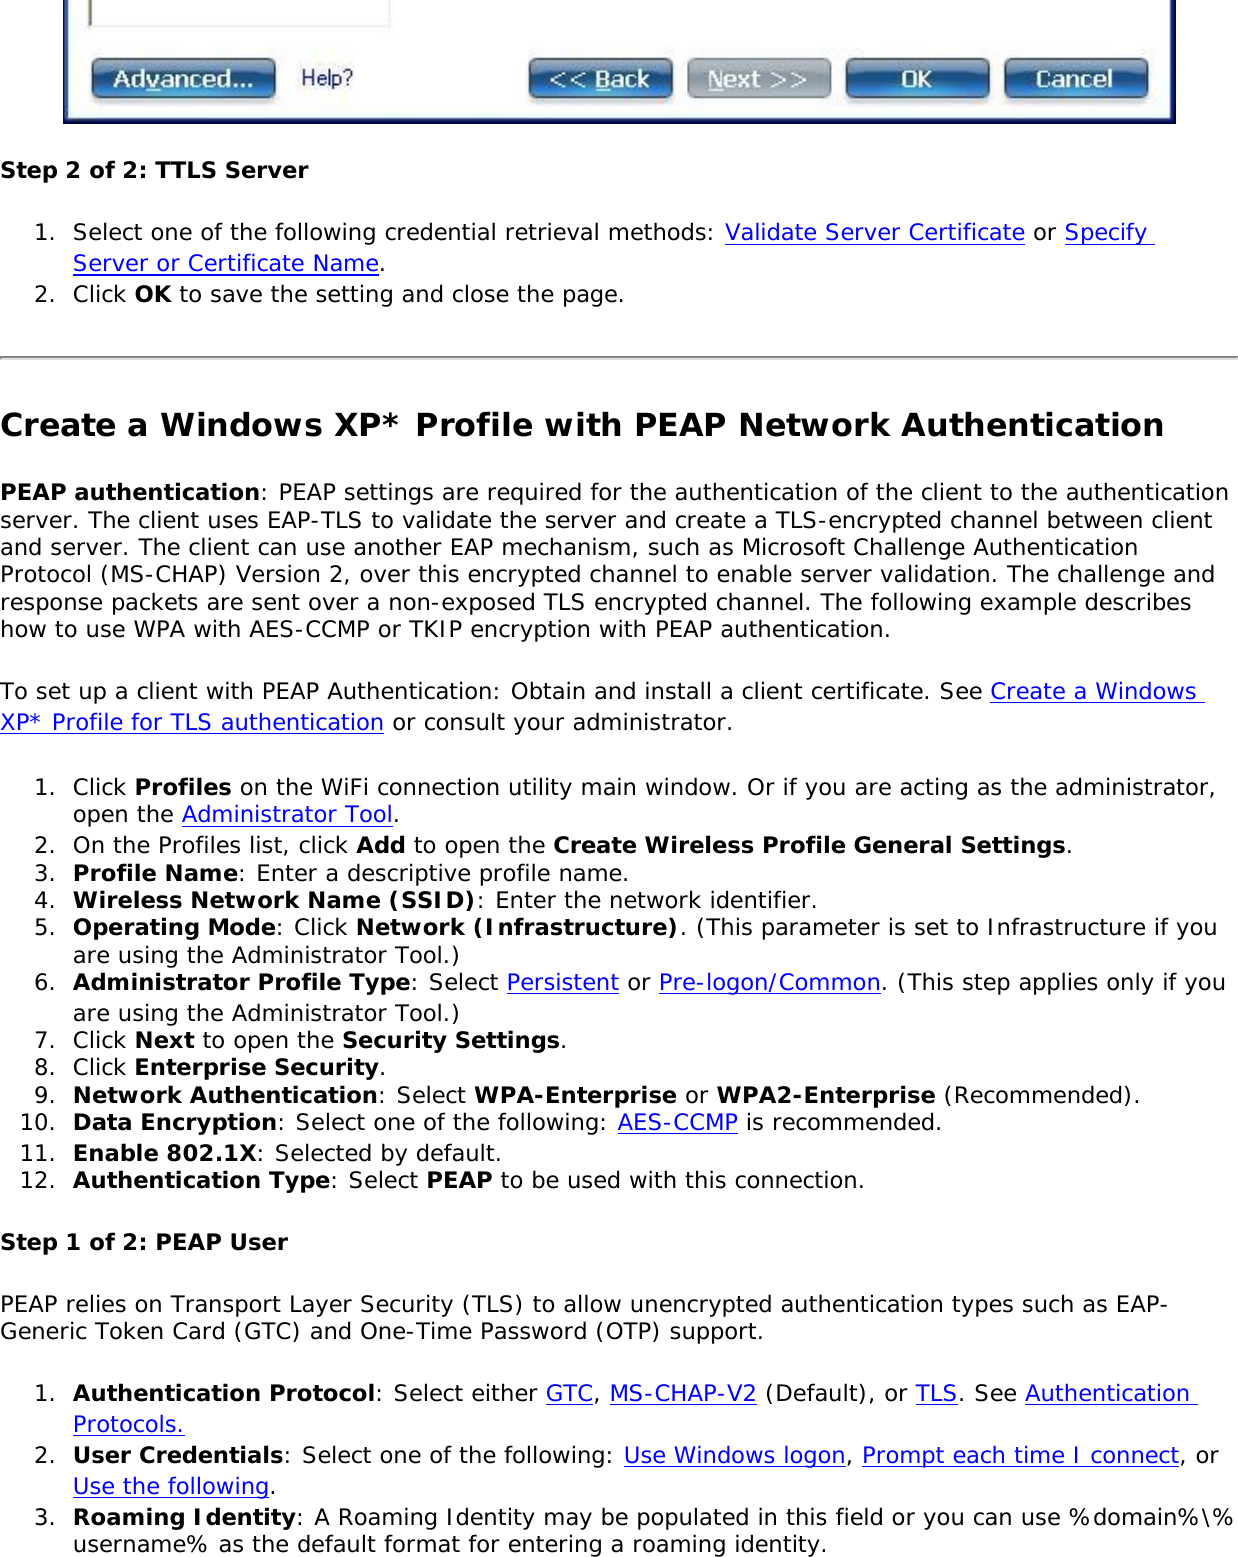 Step 2 of 2: TTLS Server1.  Select one of the following credential retrieval methods: Validate Server Certificate or Specify Server or Certificate Name.2.  Click OK to save the setting and close the page.Create a Windows XP* Profile with PEAP Network Authentication PEAP authentication: PEAP settings are required for the authentication of the client to the authentication server. The client uses EAP-TLS to validate the server and create a TLS-encrypted channel between client and server. The client can use another EAP mechanism, such as Microsoft Challenge Authentication Protocol (MS-CHAP) Version 2, over this encrypted channel to enable server validation. The challenge and response packets are sent over a non-exposed TLS encrypted channel. The following example describes how to use WPA with AES-CCMP or TKIP encryption with PEAP authentication.To set up a client with PEAP Authentication: Obtain and install a client certificate. See Create a Windows XP* Profile for TLS authentication or consult your administrator.1.  Click Profiles on the WiFi connection utility main window. Or if you are acting as the administrator, open the Administrator Tool. 2.  On the Profiles list, click Add to open the Create Wireless Profile General Settings.3.  Profile Name: Enter a descriptive profile name.4.  Wireless Network Name (SSID): Enter the network identifier.5.  Operating Mode: Click Network (Infrastructure). (This parameter is set to Infrastructure if you are using the Administrator Tool.)6.  Administrator Profile Type: Select Persistent or Pre-logon/Common. (This step applies only if you are using the Administrator Tool.)7.  Click Next to open the Security Settings.8.  Click Enterprise Security.9.  Network Authentication: Select WPA-Enterprise or WPA2-Enterprise (Recommended).10.  Data Encryption: Select one of the following: AES-CCMP is recommended. 11.  Enable 802.1X: Selected by default.12.  Authentication Type: Select PEAP to be used with this connection.Step 1 of 2: PEAP UserPEAP relies on Transport Layer Security (TLS) to allow unencrypted authentication types such as EAP-Generic Token Card (GTC) and One-Time Password (OTP) support. 1.  Authentication Protocol: Select either GTC, MS-CHAP-V2 (Default), or TLS. See Authentication Protocols.2.  User Credentials: Select one of the following: Use Windows logon, Prompt each time I connect, or Use the following.3.  Roaming Identity: A Roaming Identity may be populated in this field or you can use %domain%\%username% as the default format for entering a roaming identity. 